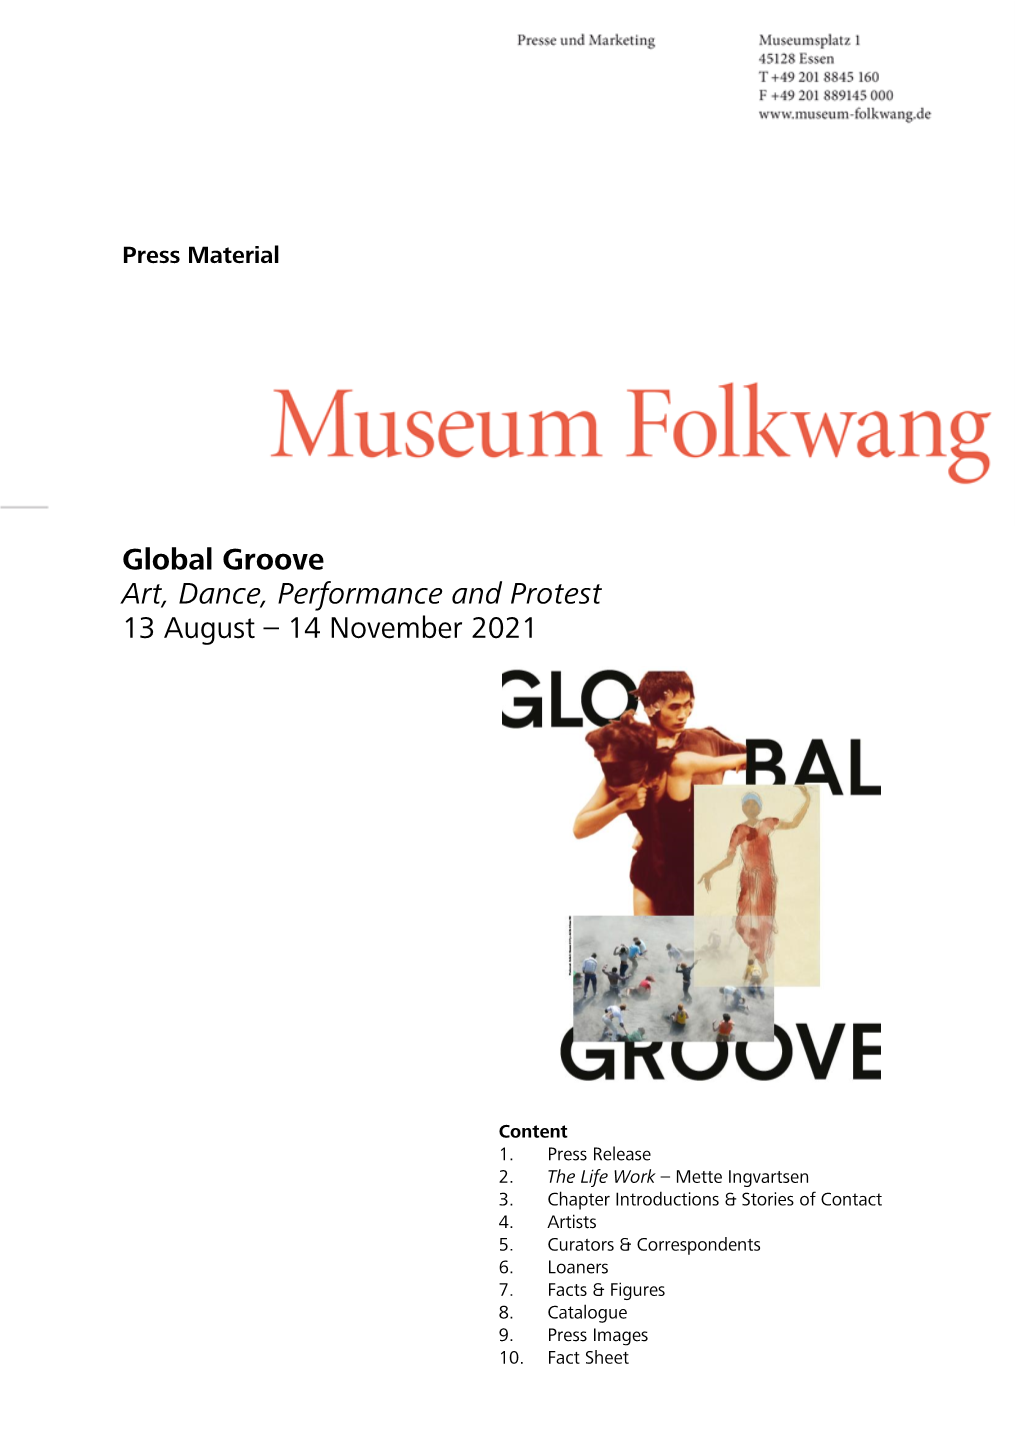 Global Groove Art, Dance, Performance and Protest 13 August – 14 November 2021